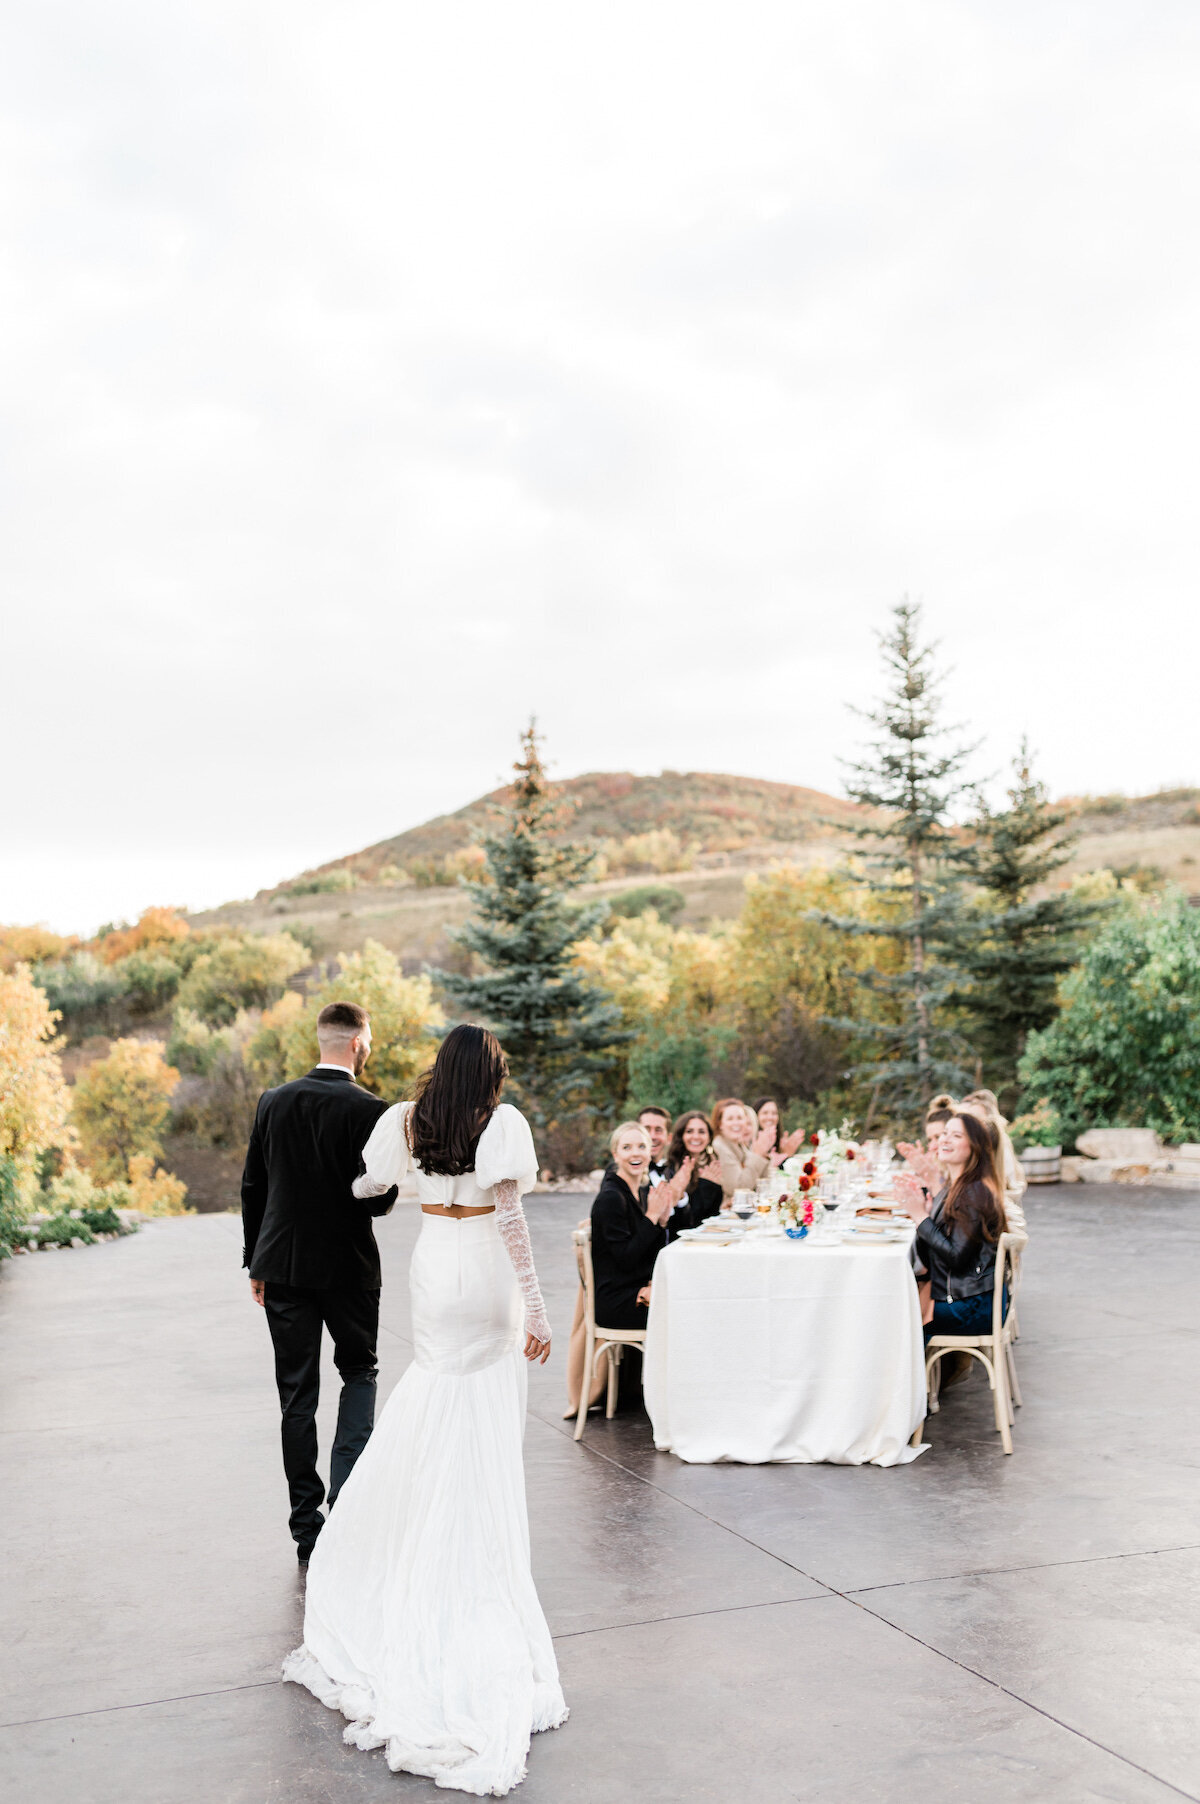 From sweeping vistas to intricate details, our high-end wedding photography at The Lodge at Blue Sky captures the romance and elegance of your celebration. Every frame is a masterpiece of your love story.